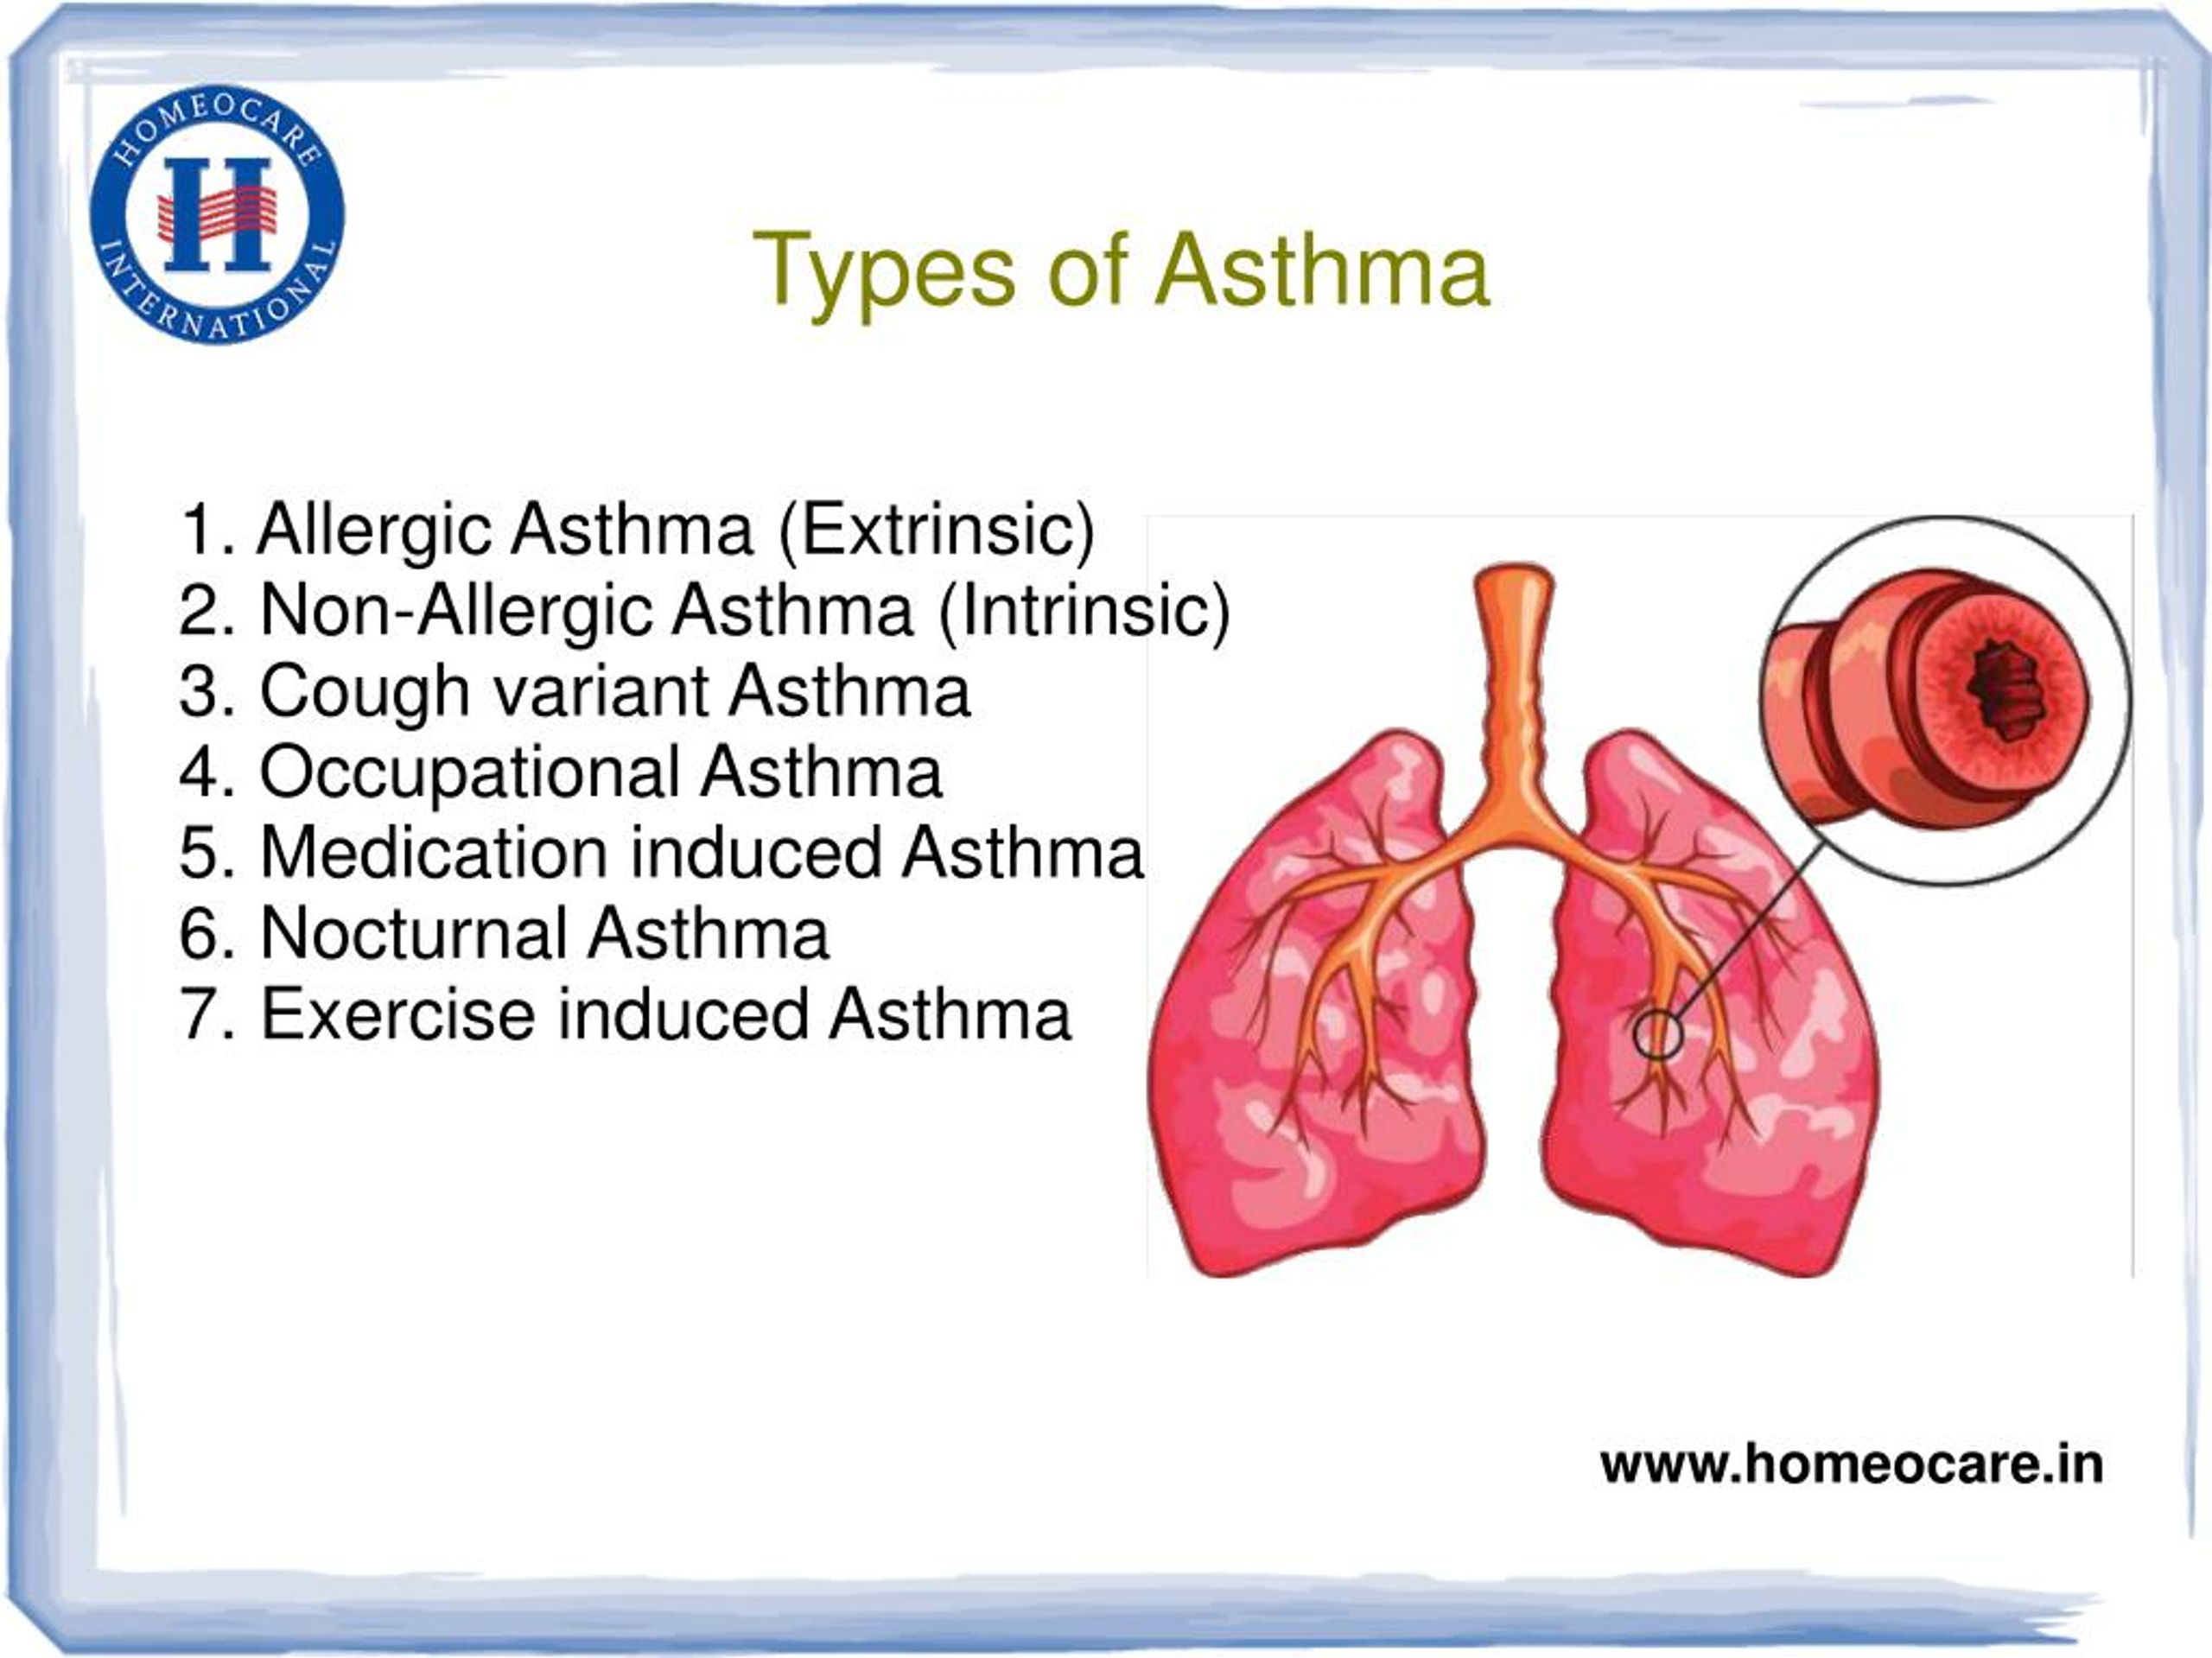 Homeopathy Treatment for Asthma